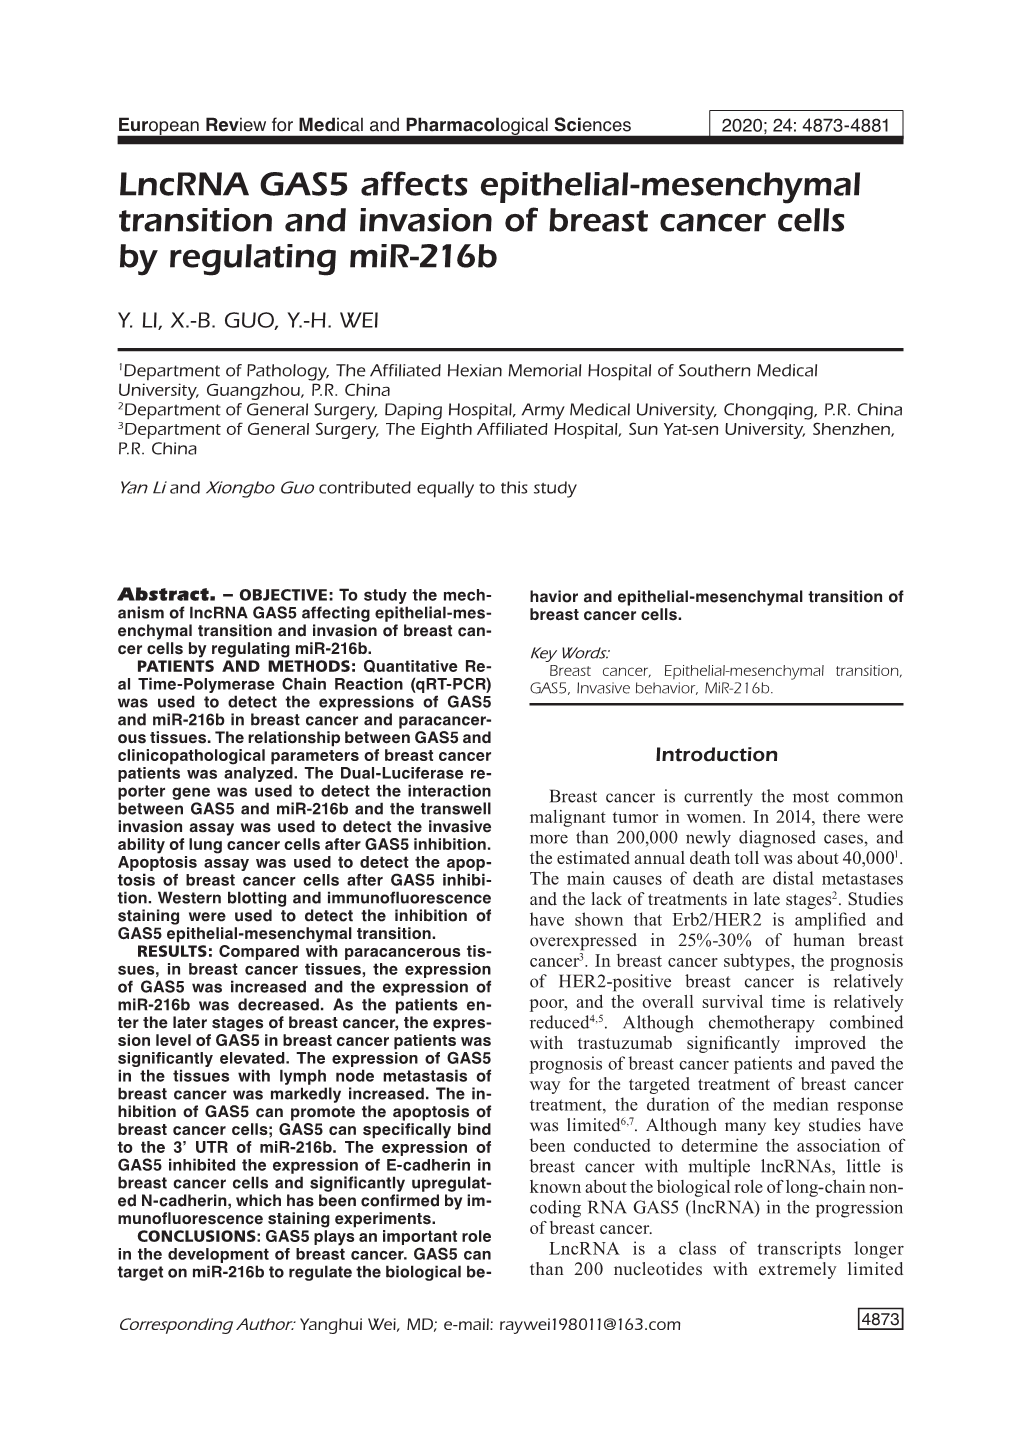 Lncrna GAS5 Affects Epithelial-Mesenchymal Transition and Invasion of Breast Cancer Cells by Regulating Mir-216B